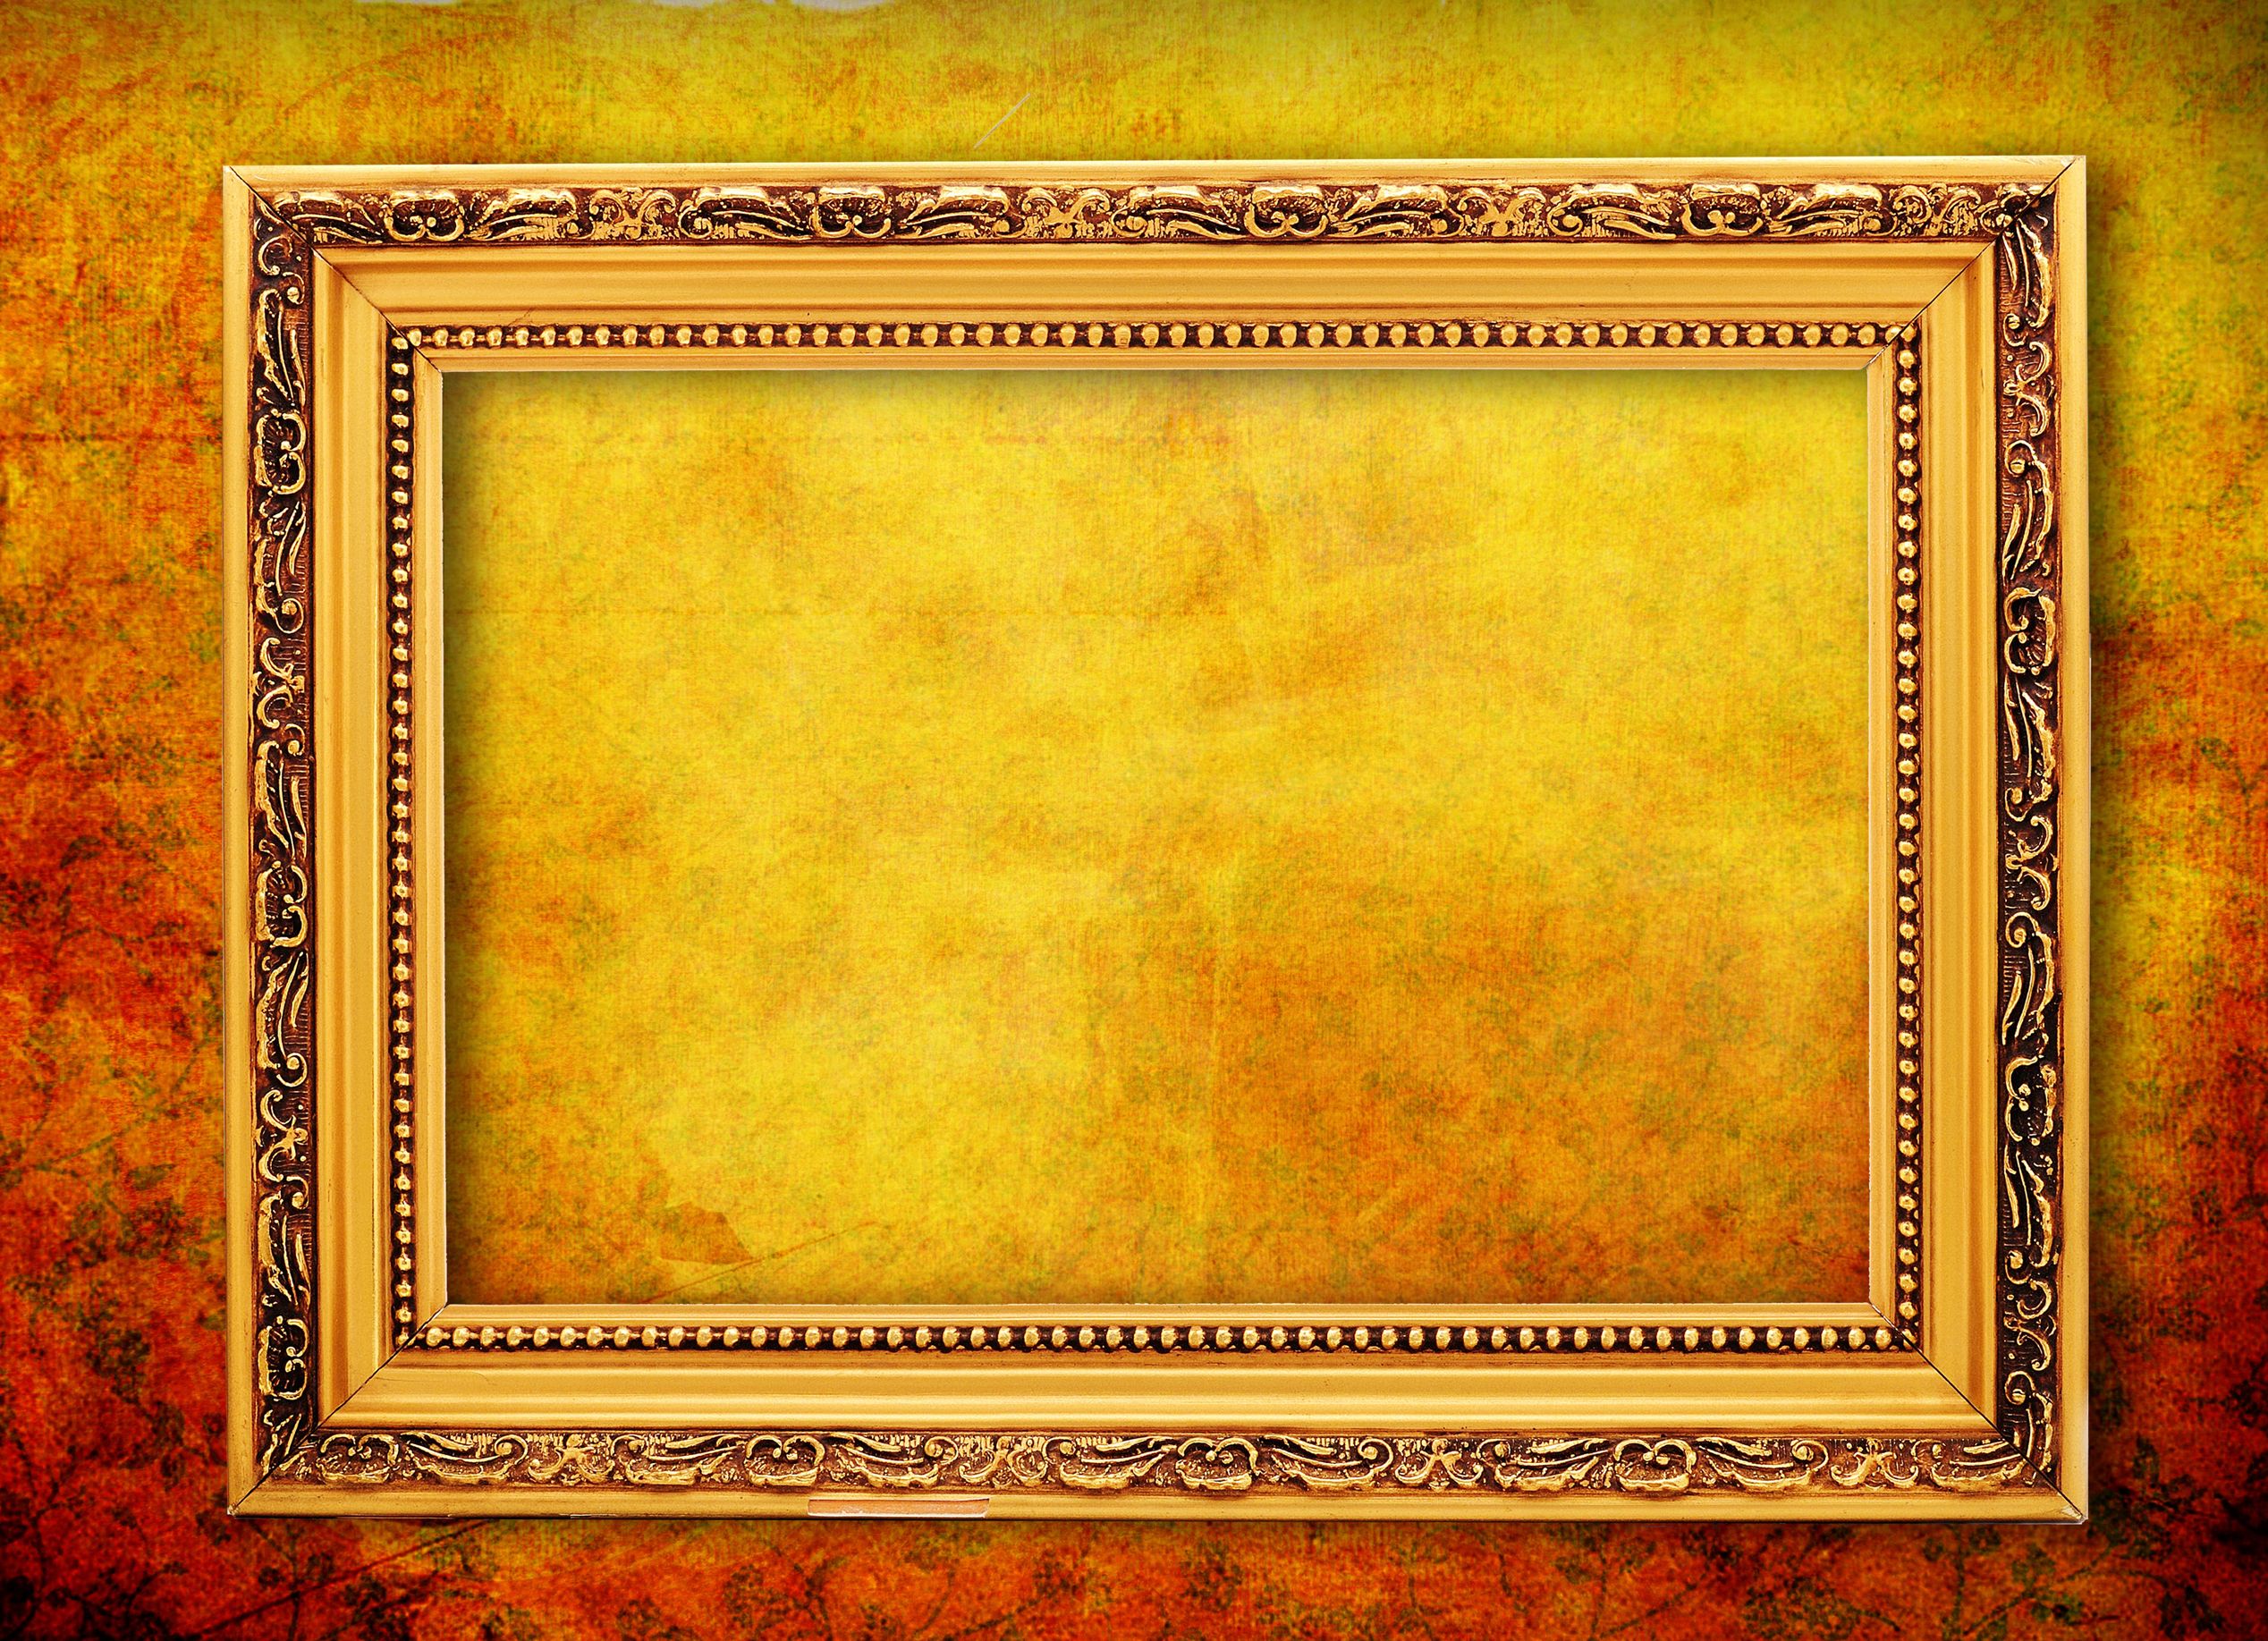 Pattern textures frame Powerpoint textures frame